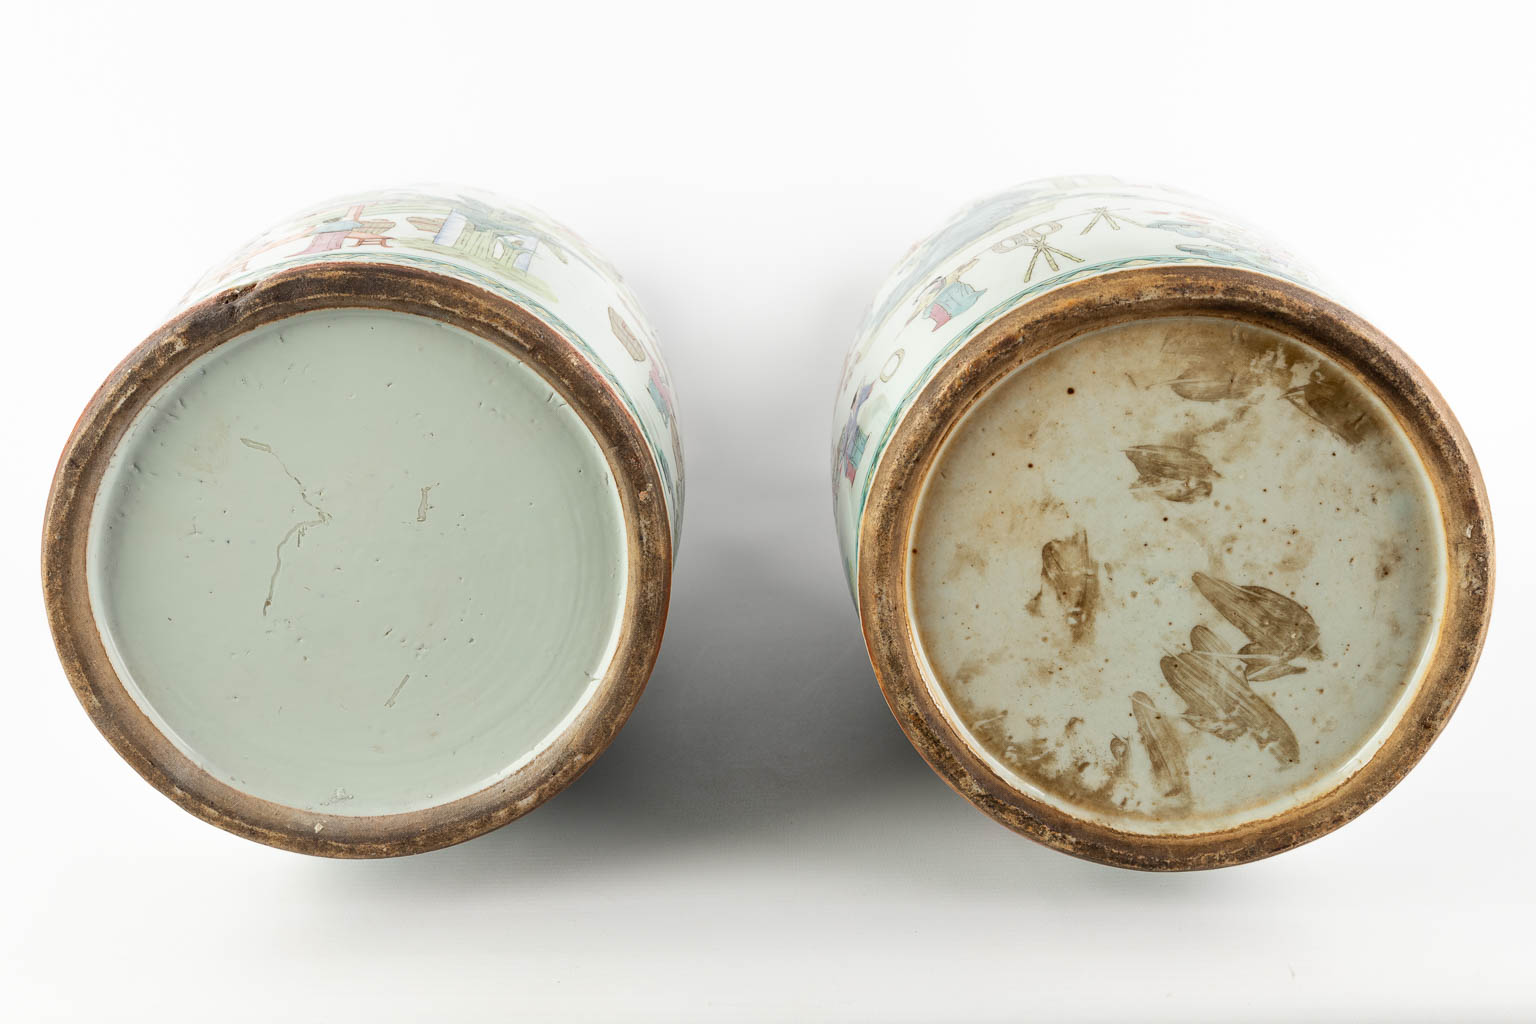 A pair of Chinese Famille Verte vases decorated with workers in the garden. 19th C. (H:59 x D:21 cm)